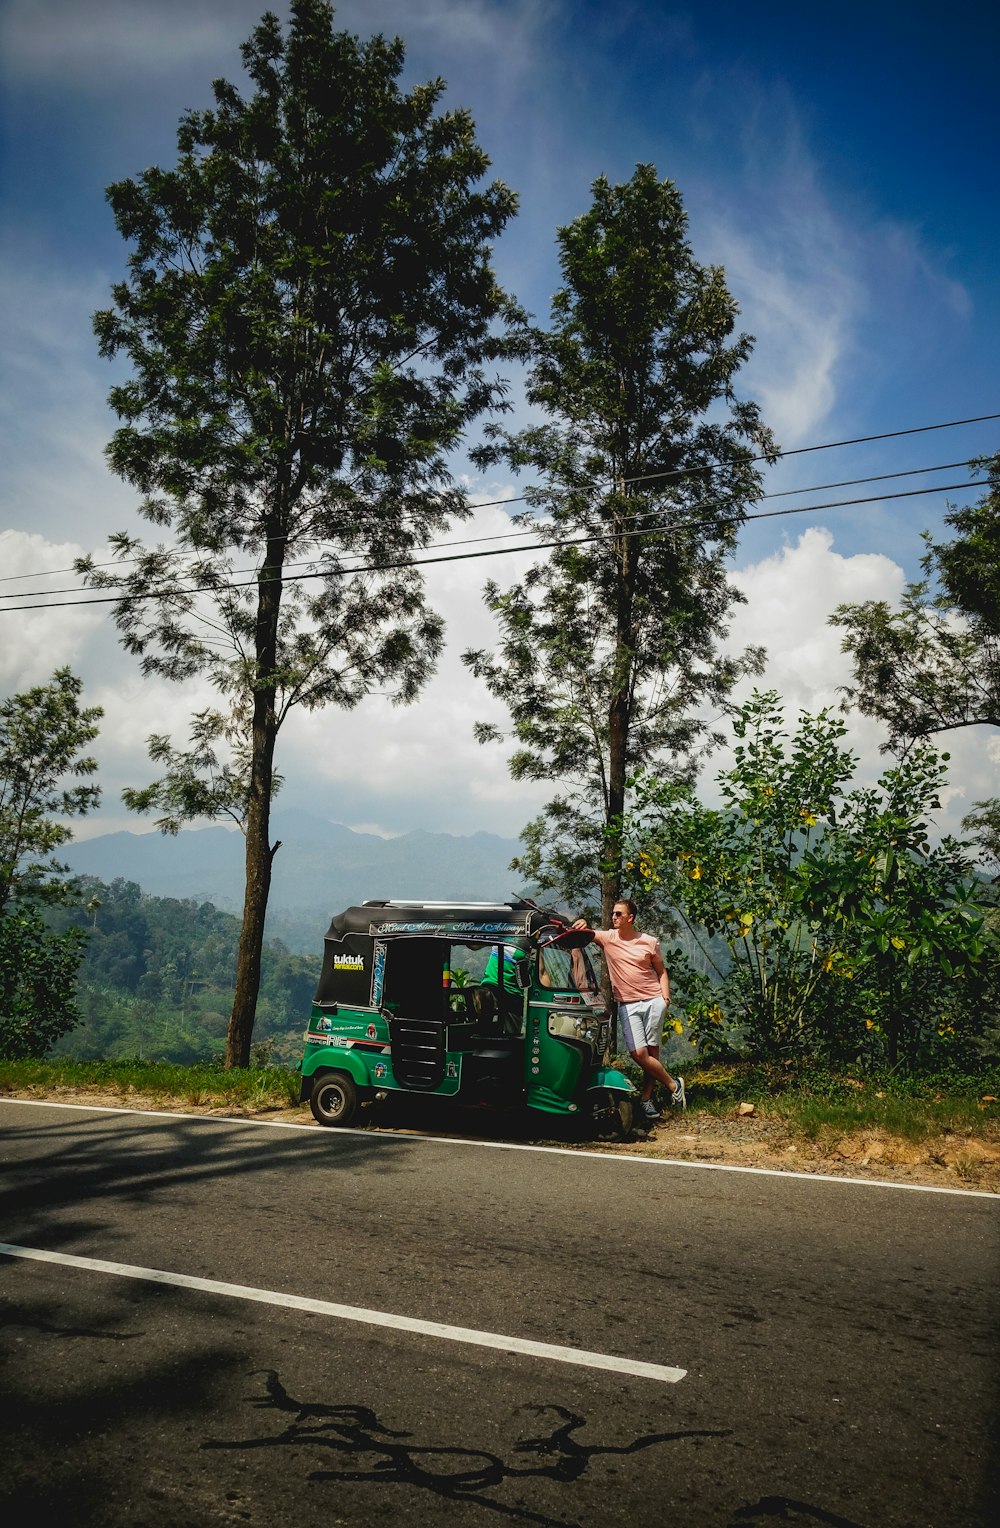 man in green jacket riding green and black auto rickshaw on road during daytime